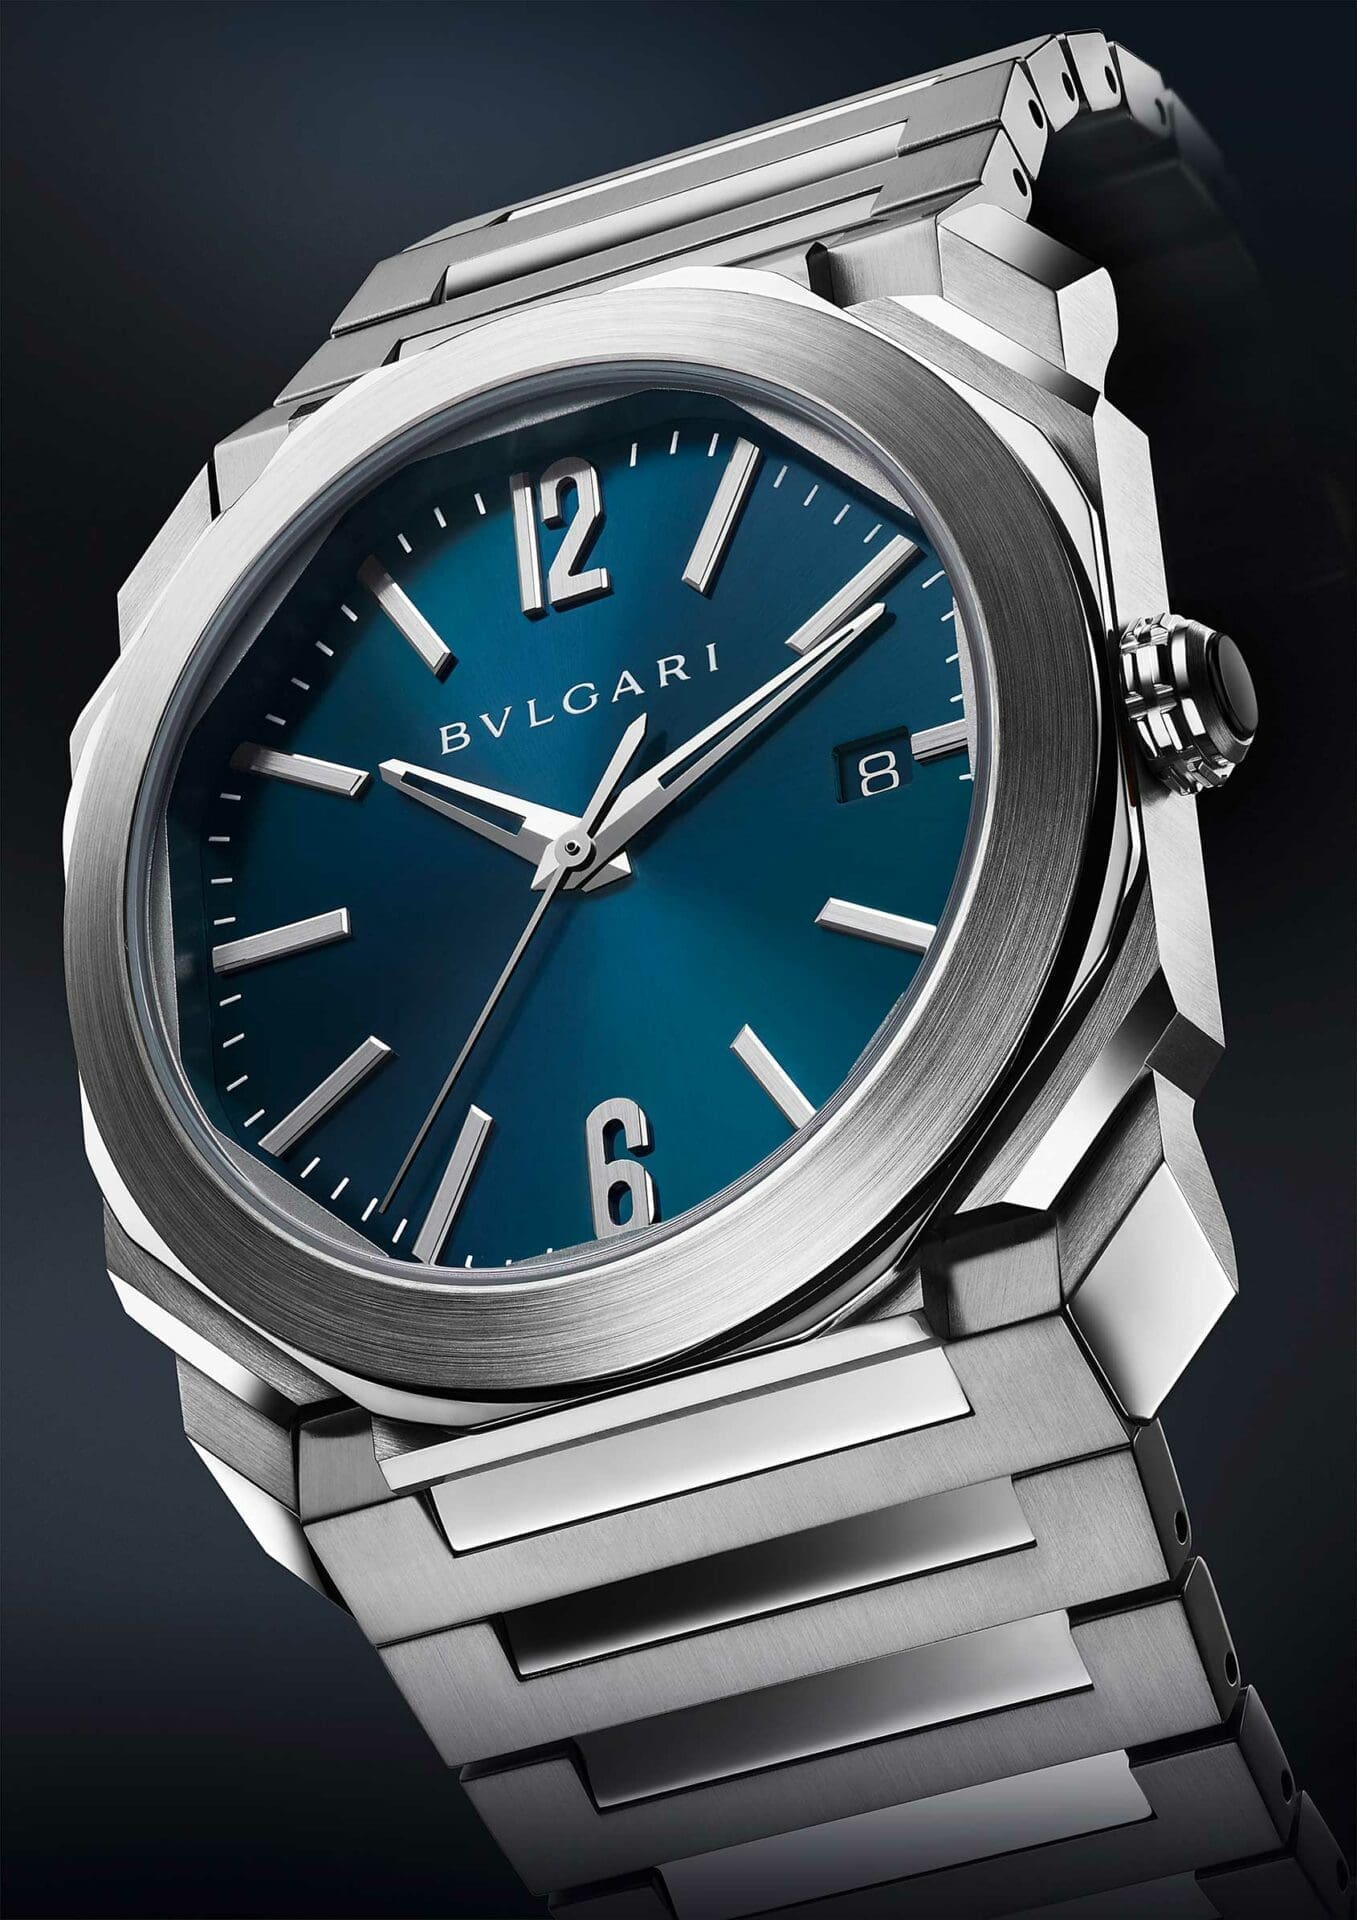 HOLIDAY BUYING GUIDE: The Bulgari Octo Solotempo